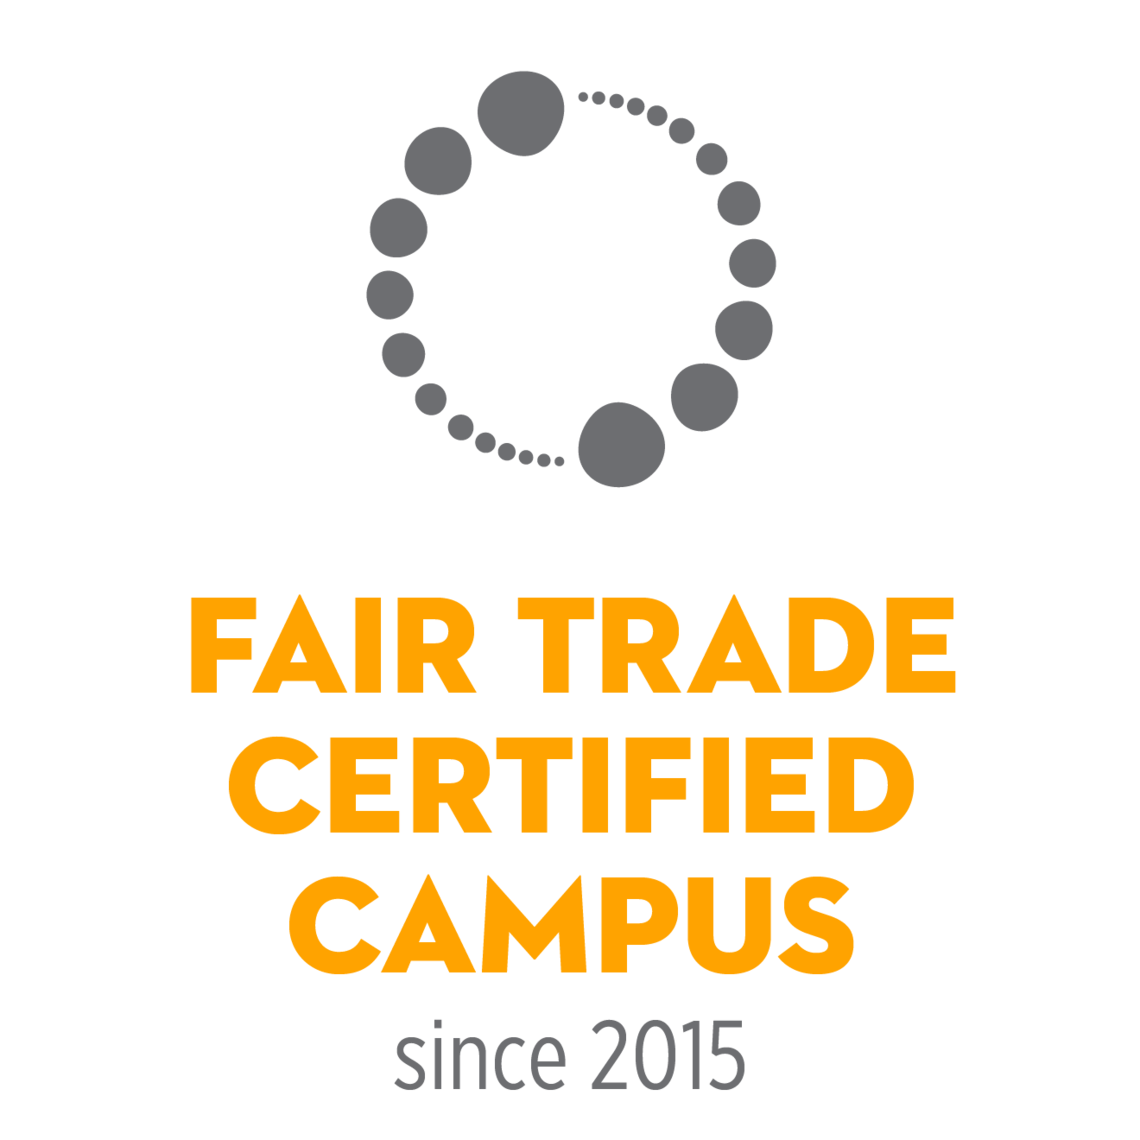 Fair Trade Certified Campus since 2015